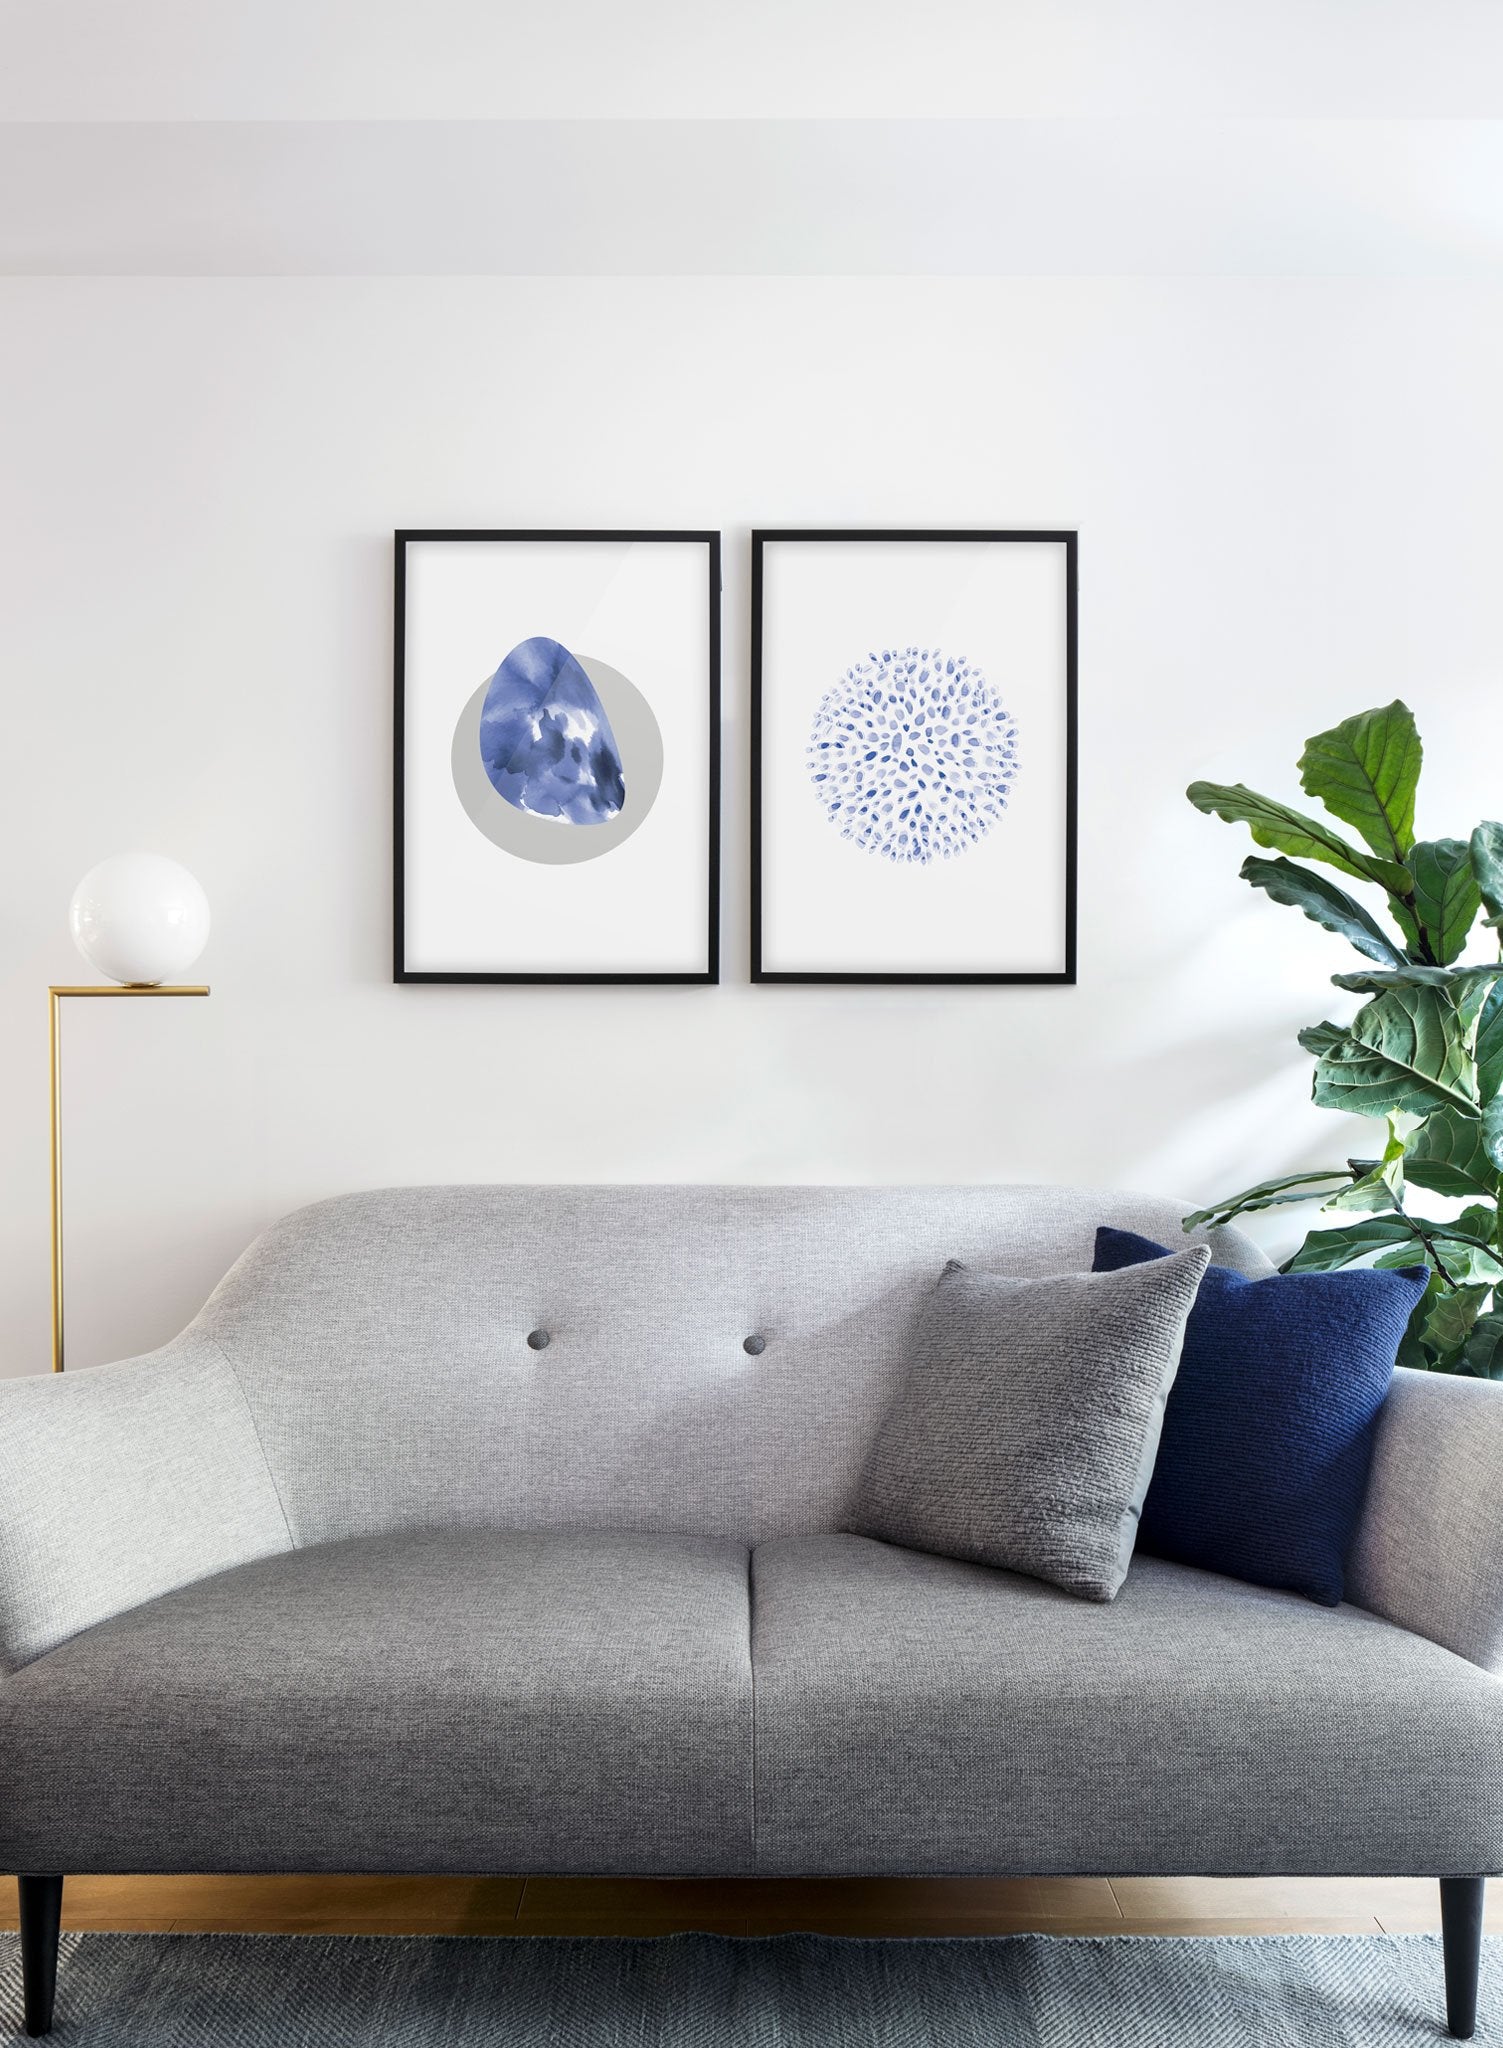 Modern minimalist poster by Opposite Wall with abstract illustration of Fade into night and dreams - living room